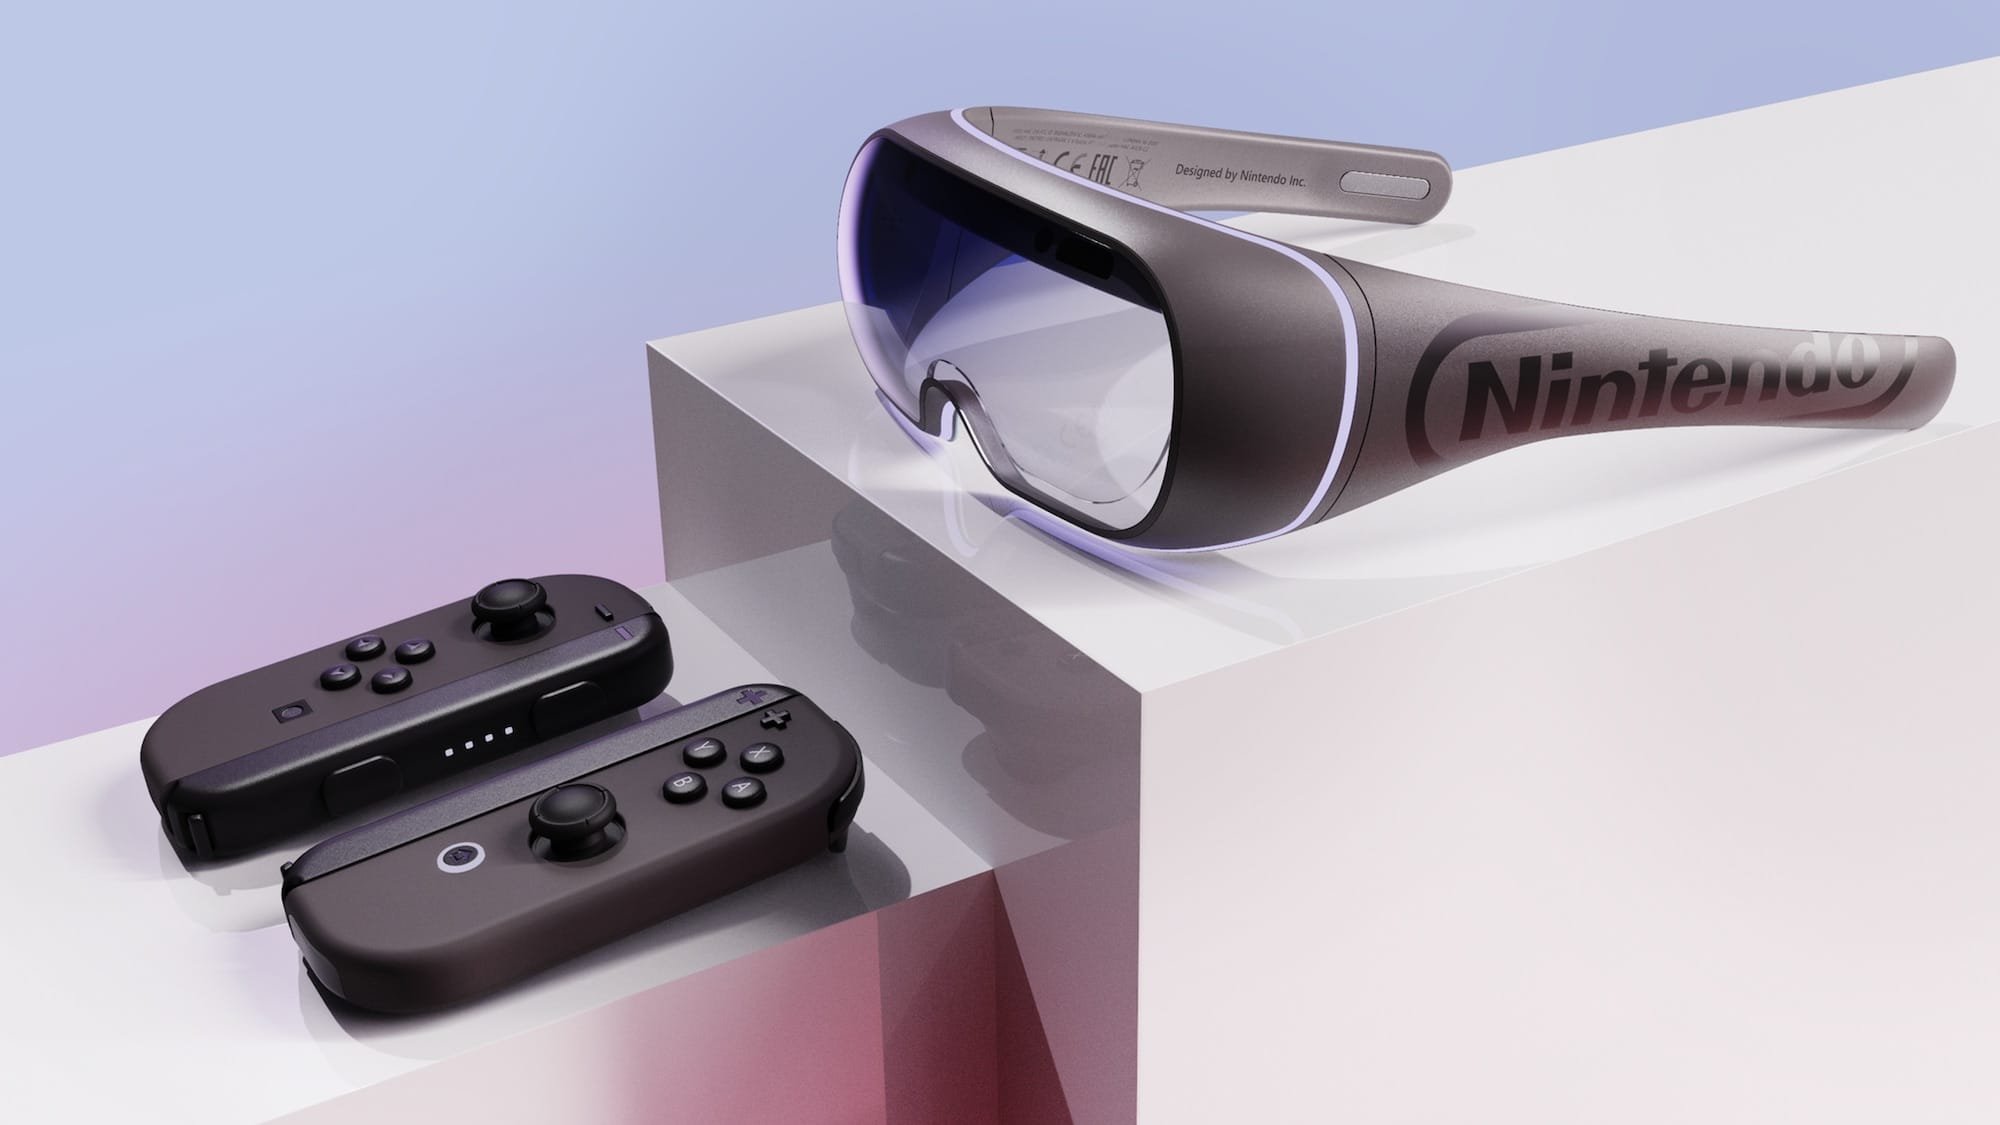 James Tsai Nintendo Switch Joy-Glasses VR gaming goggles offer a mixed reality experience